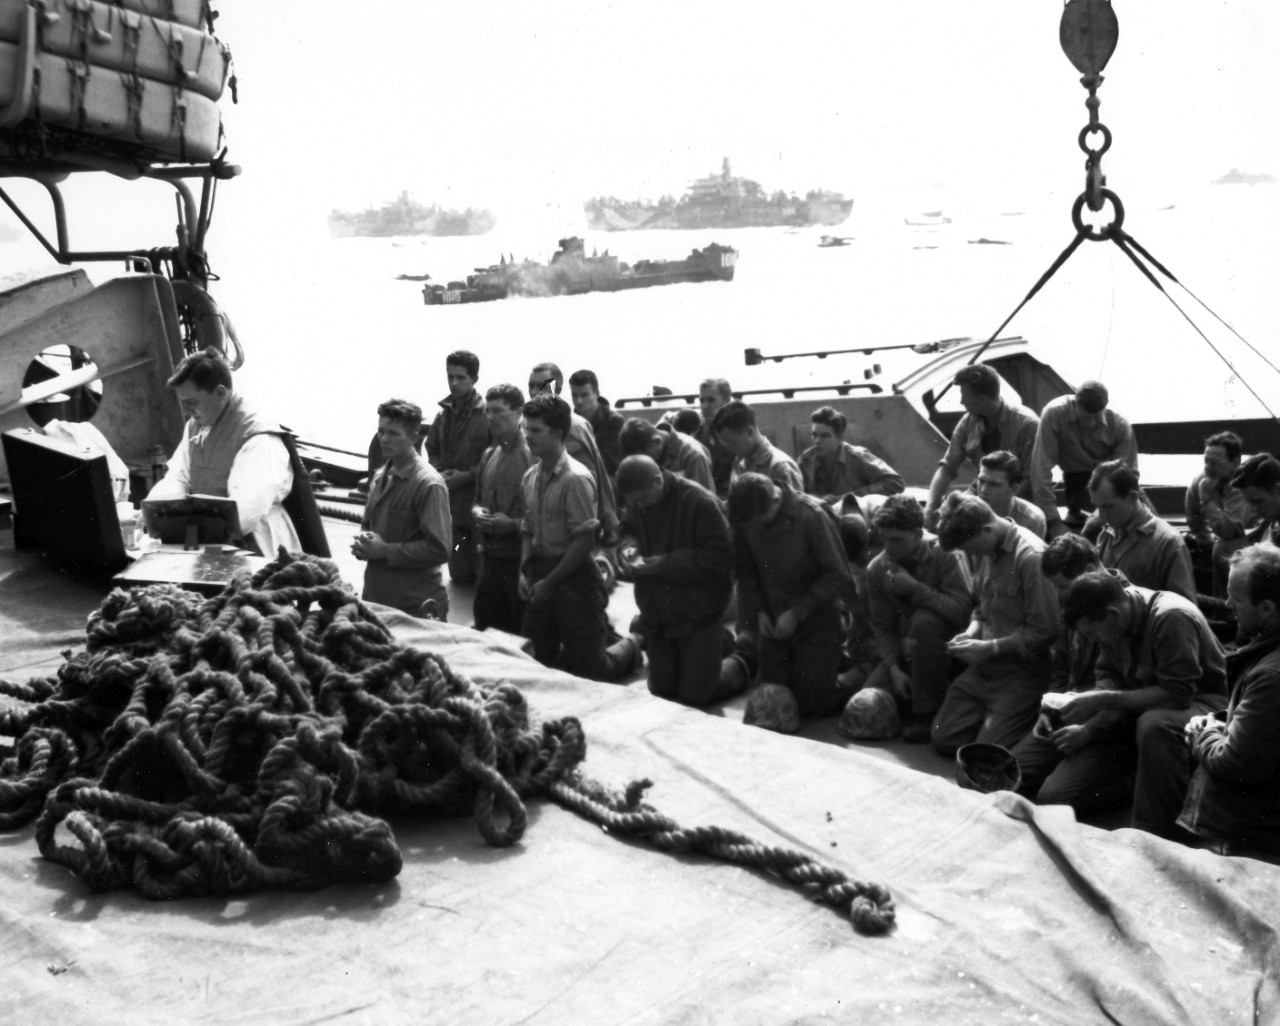 Men of the floating reserve regiment (4th Marine Division) attend a Catholic mass before their time in hell.